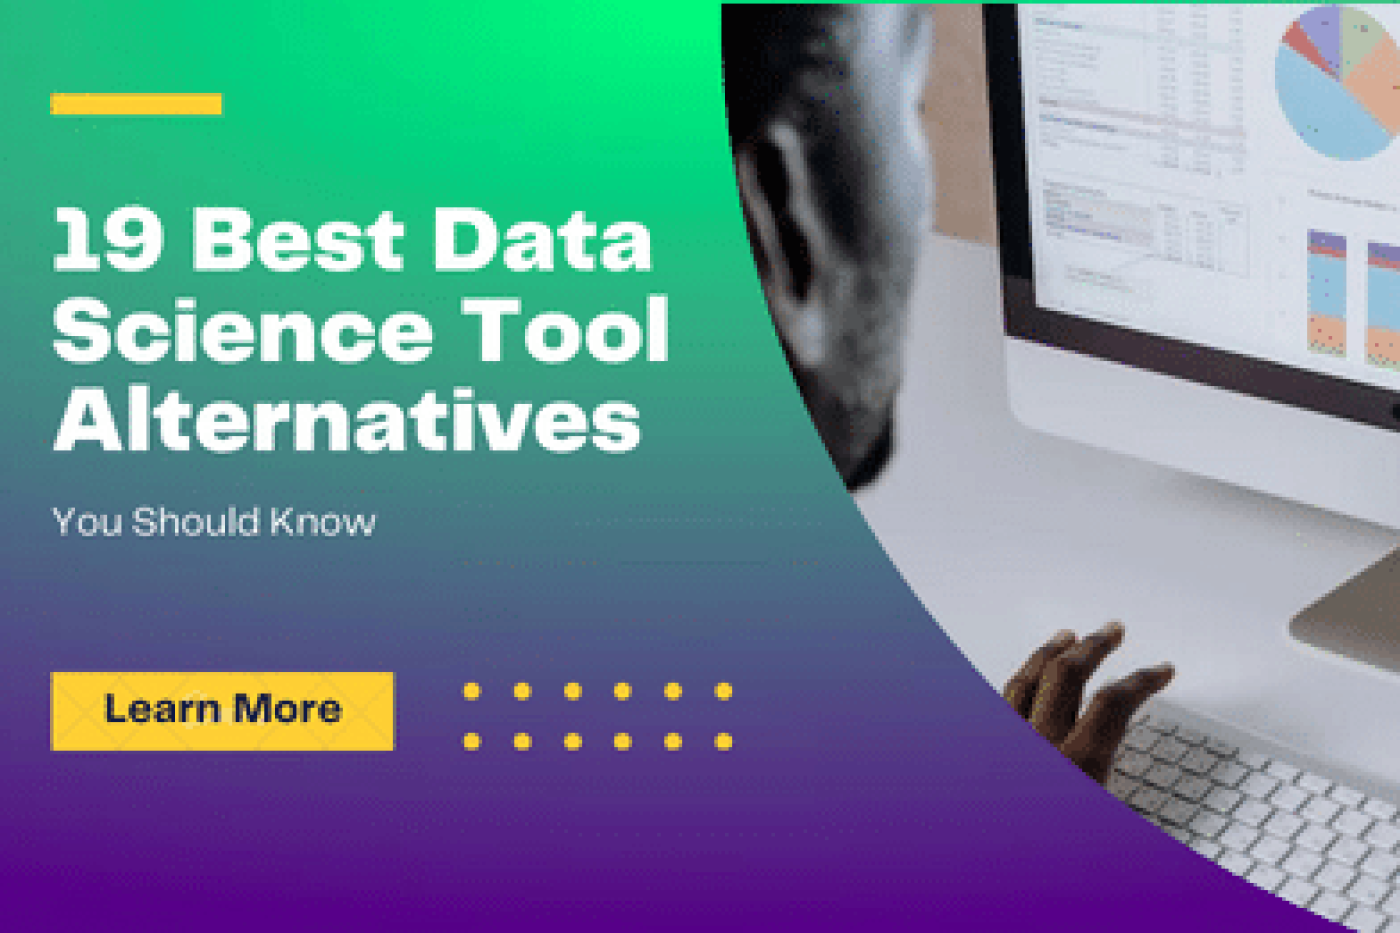 19 Best Data Science Tools Alternatives You Should Know